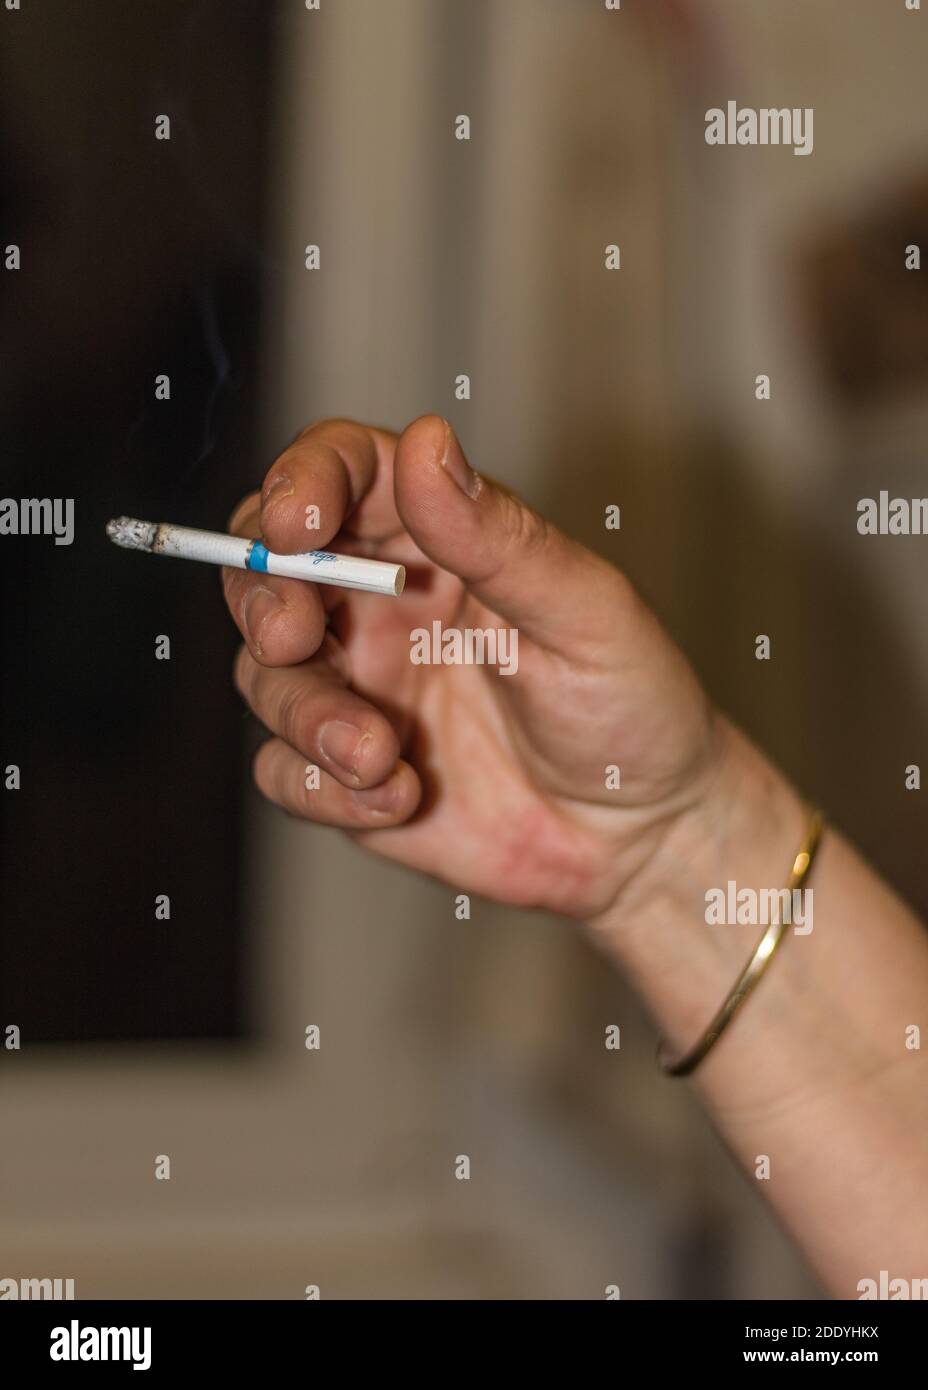 Human hand with a bracelet holding a cigarette Stock Photo - Alamy